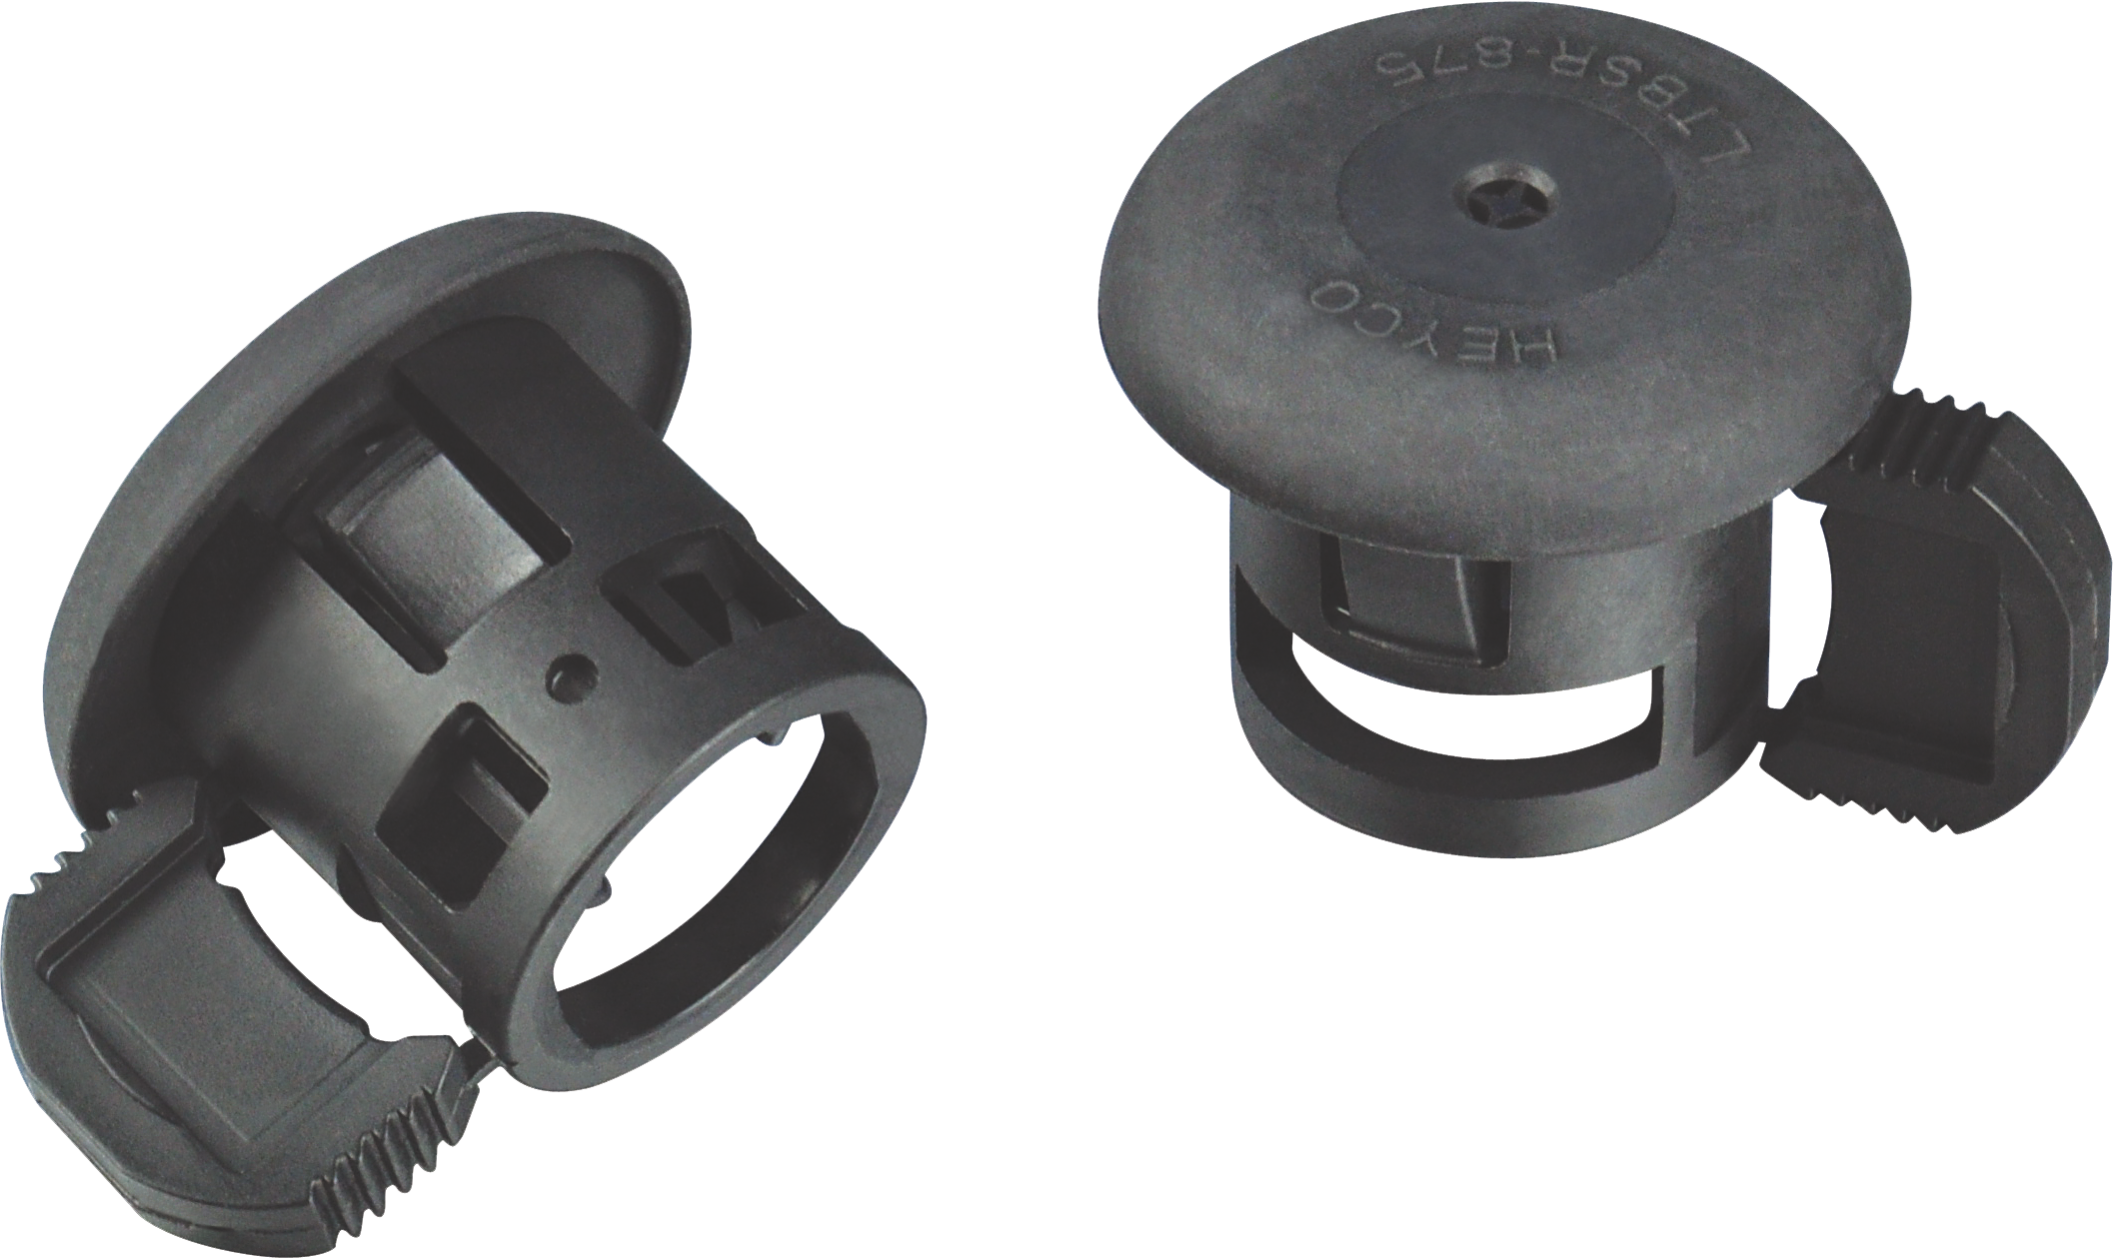 Heyco Low-Profile Snap-In Liquid-Tight Strain Relief Bushing